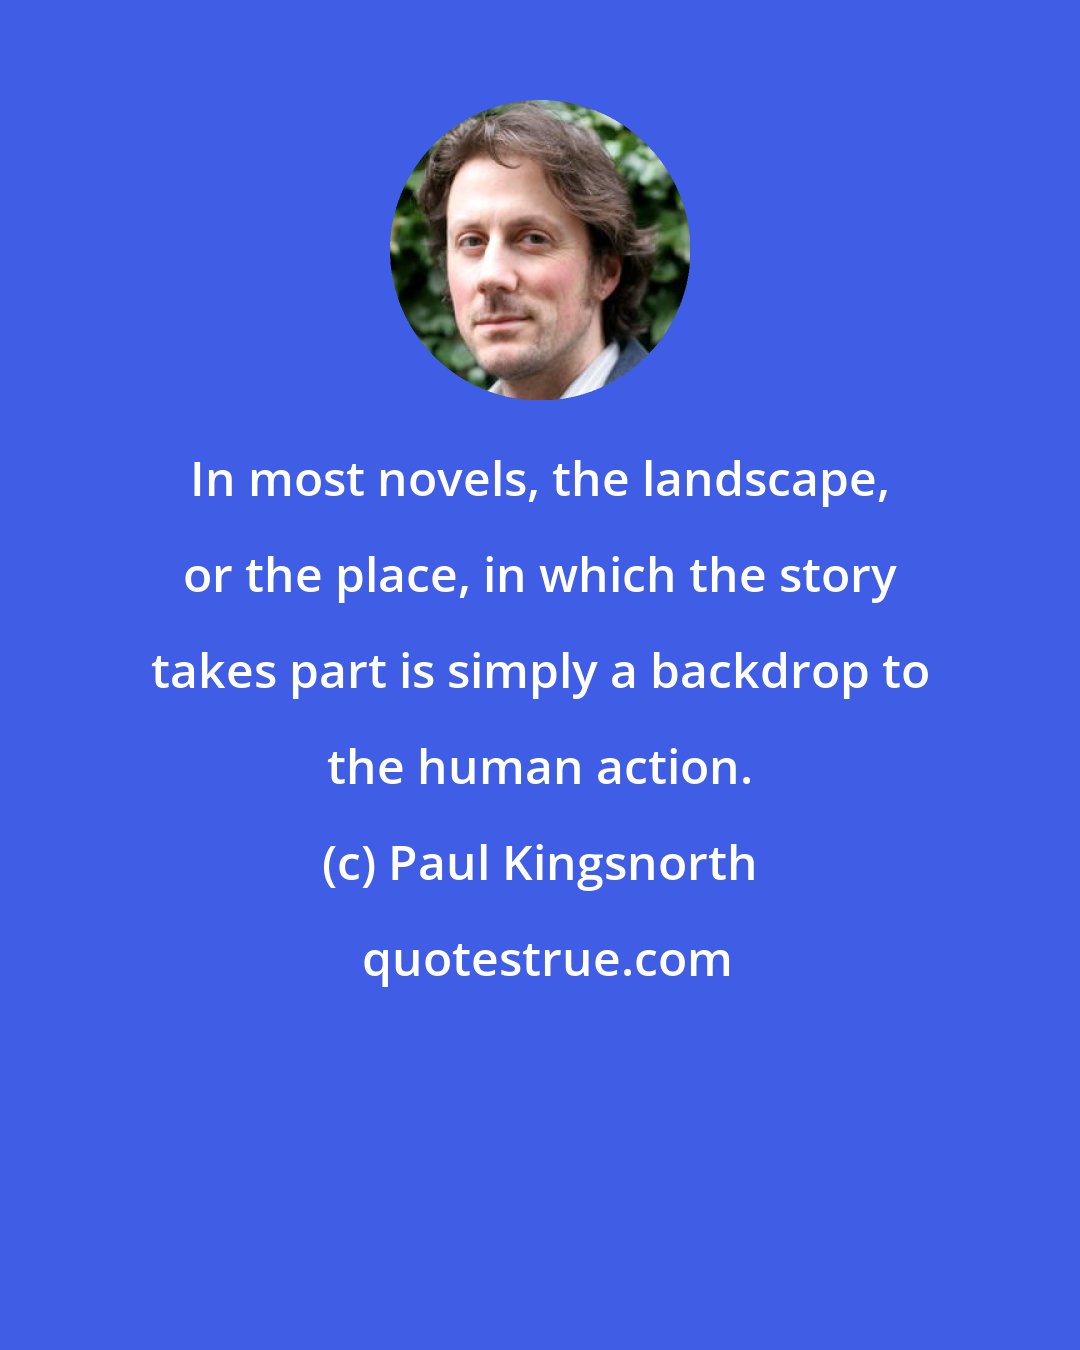 Paul Kingsnorth: In most novels, the landscape, or the place, in which the story takes part is simply a backdrop to the human action.